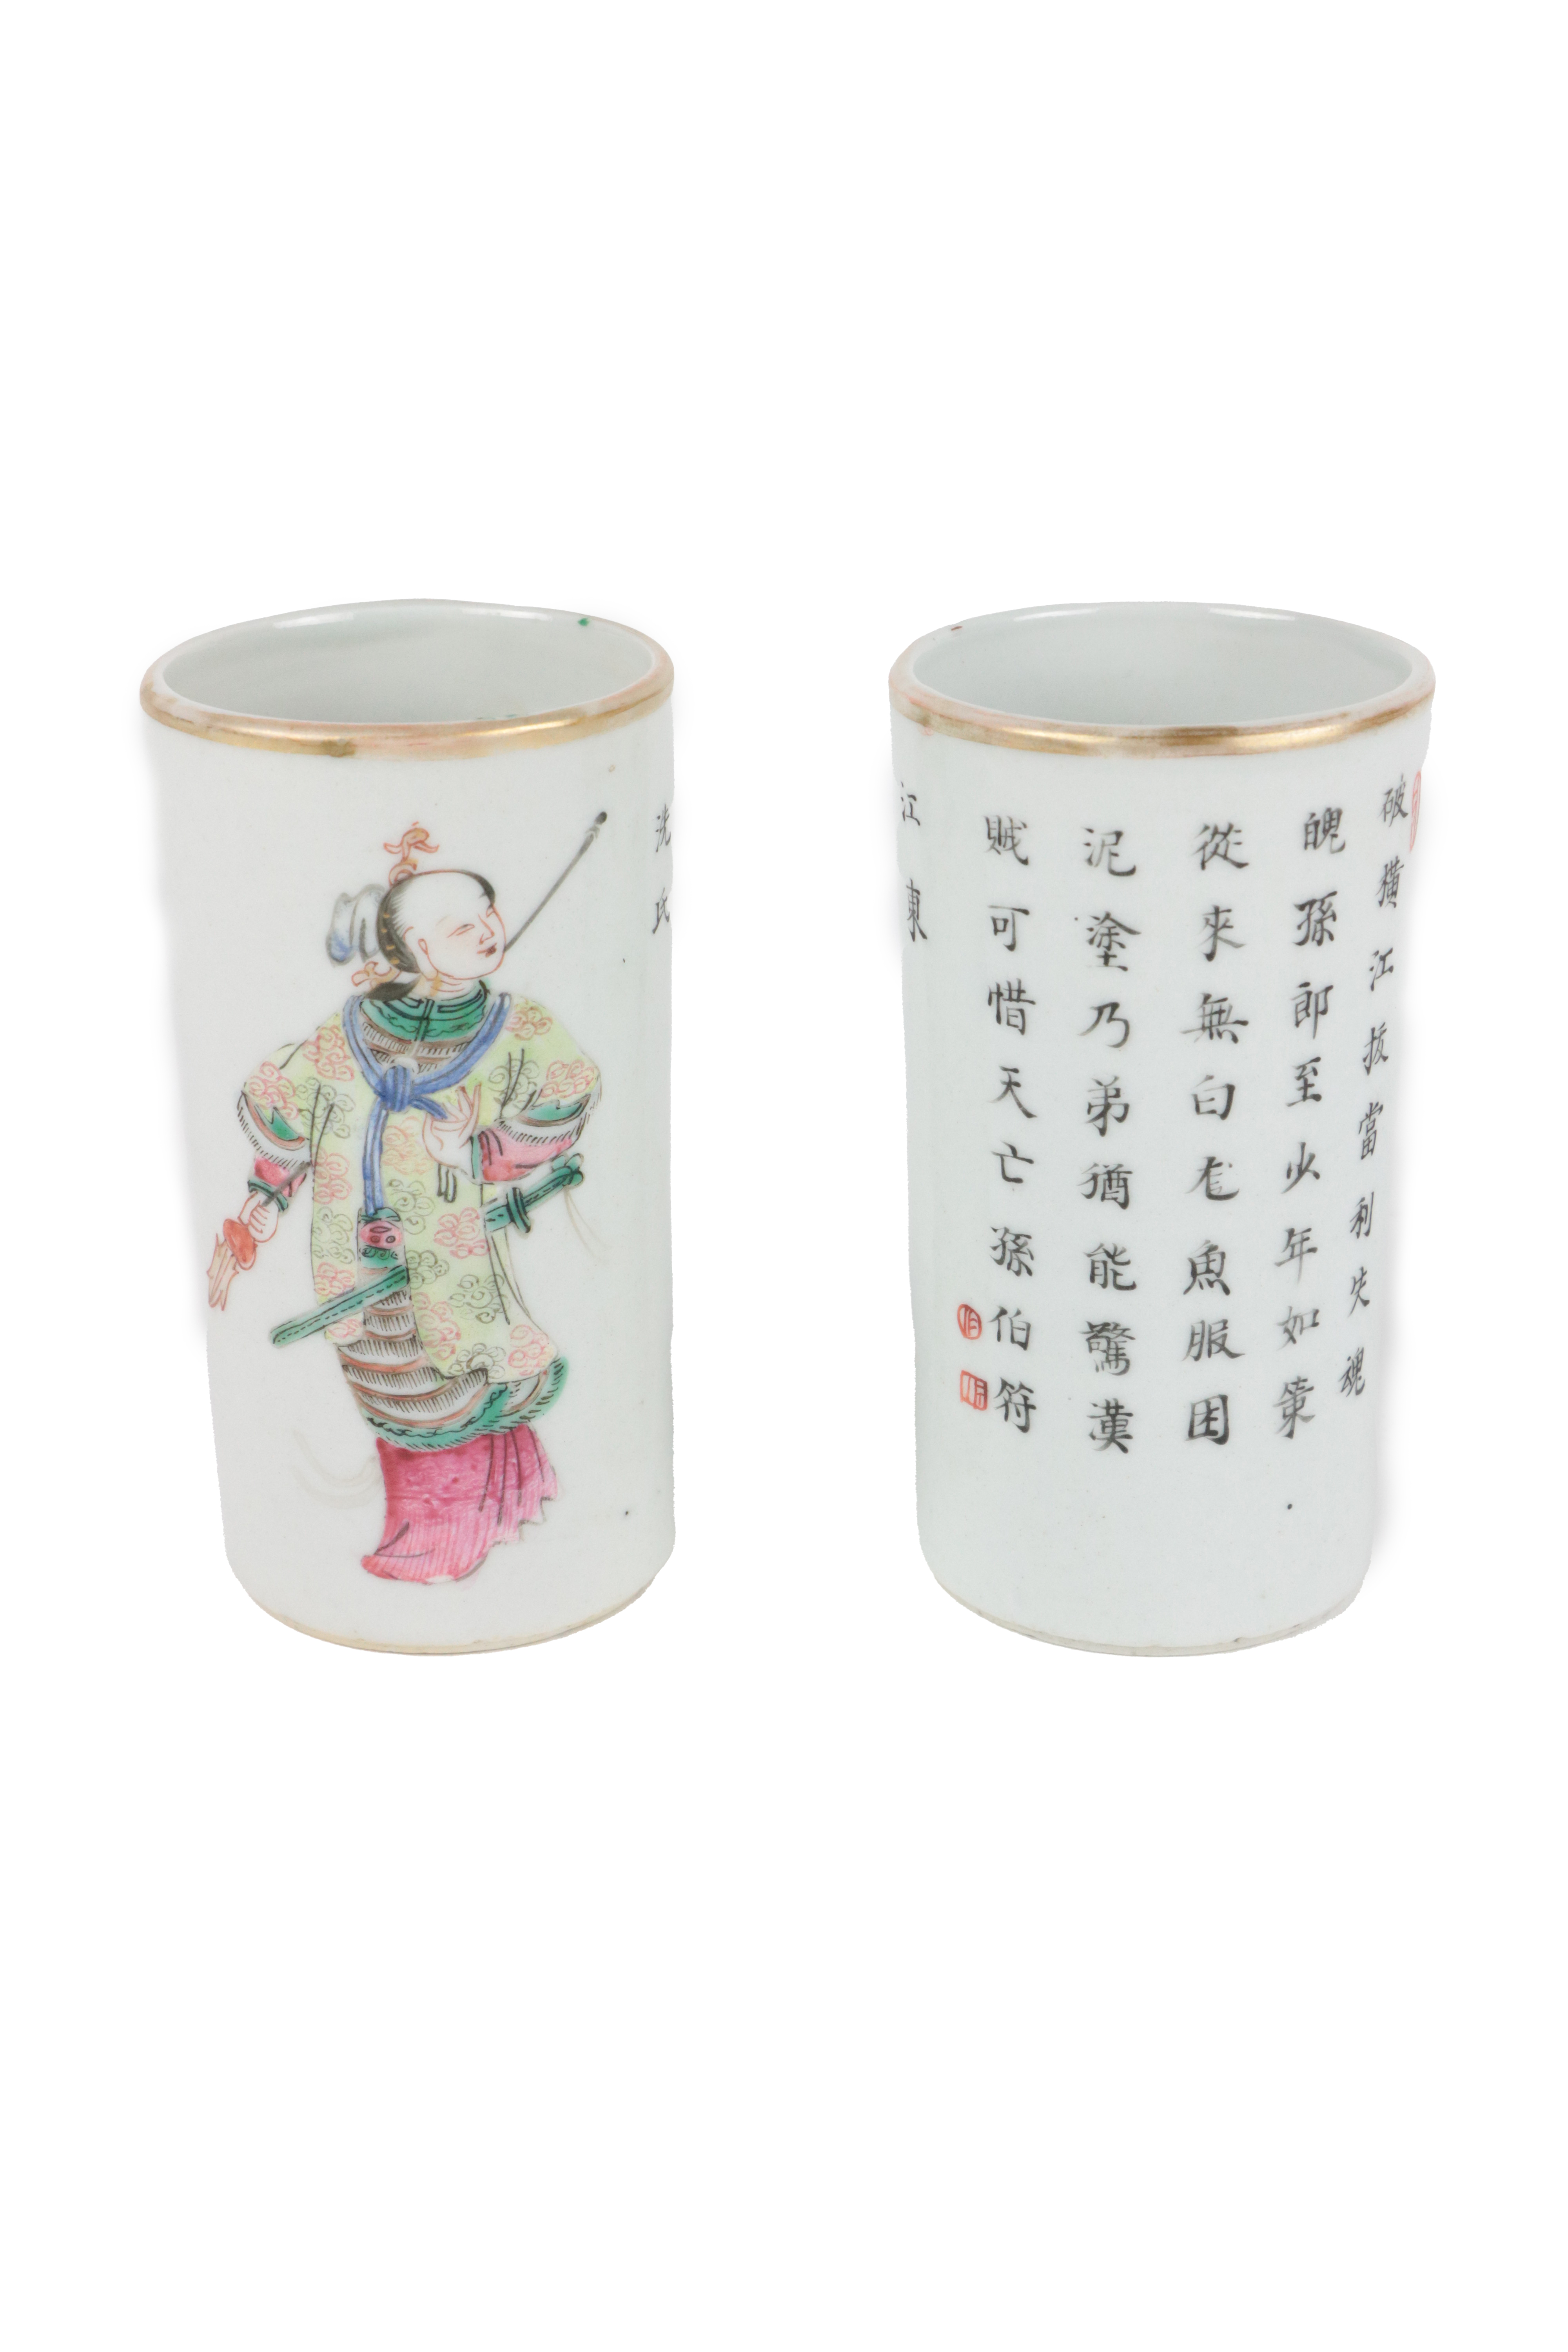 A pair of 19th Century Cantonese porcelain Brush Pots, with a male and female character on - Image 3 of 3